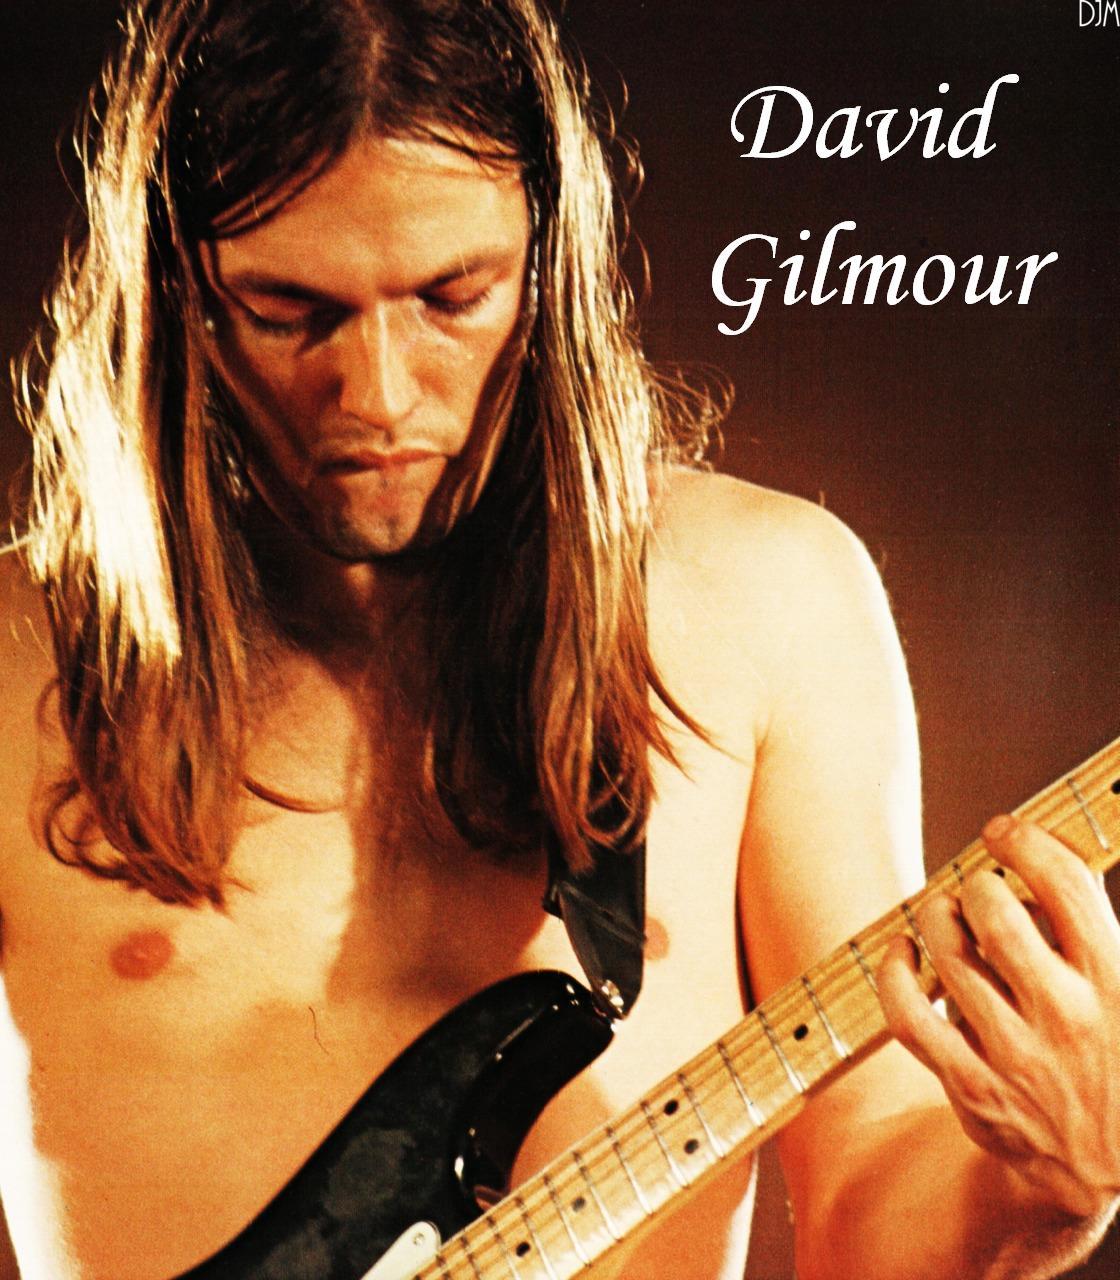 David Gilmour and his Strat